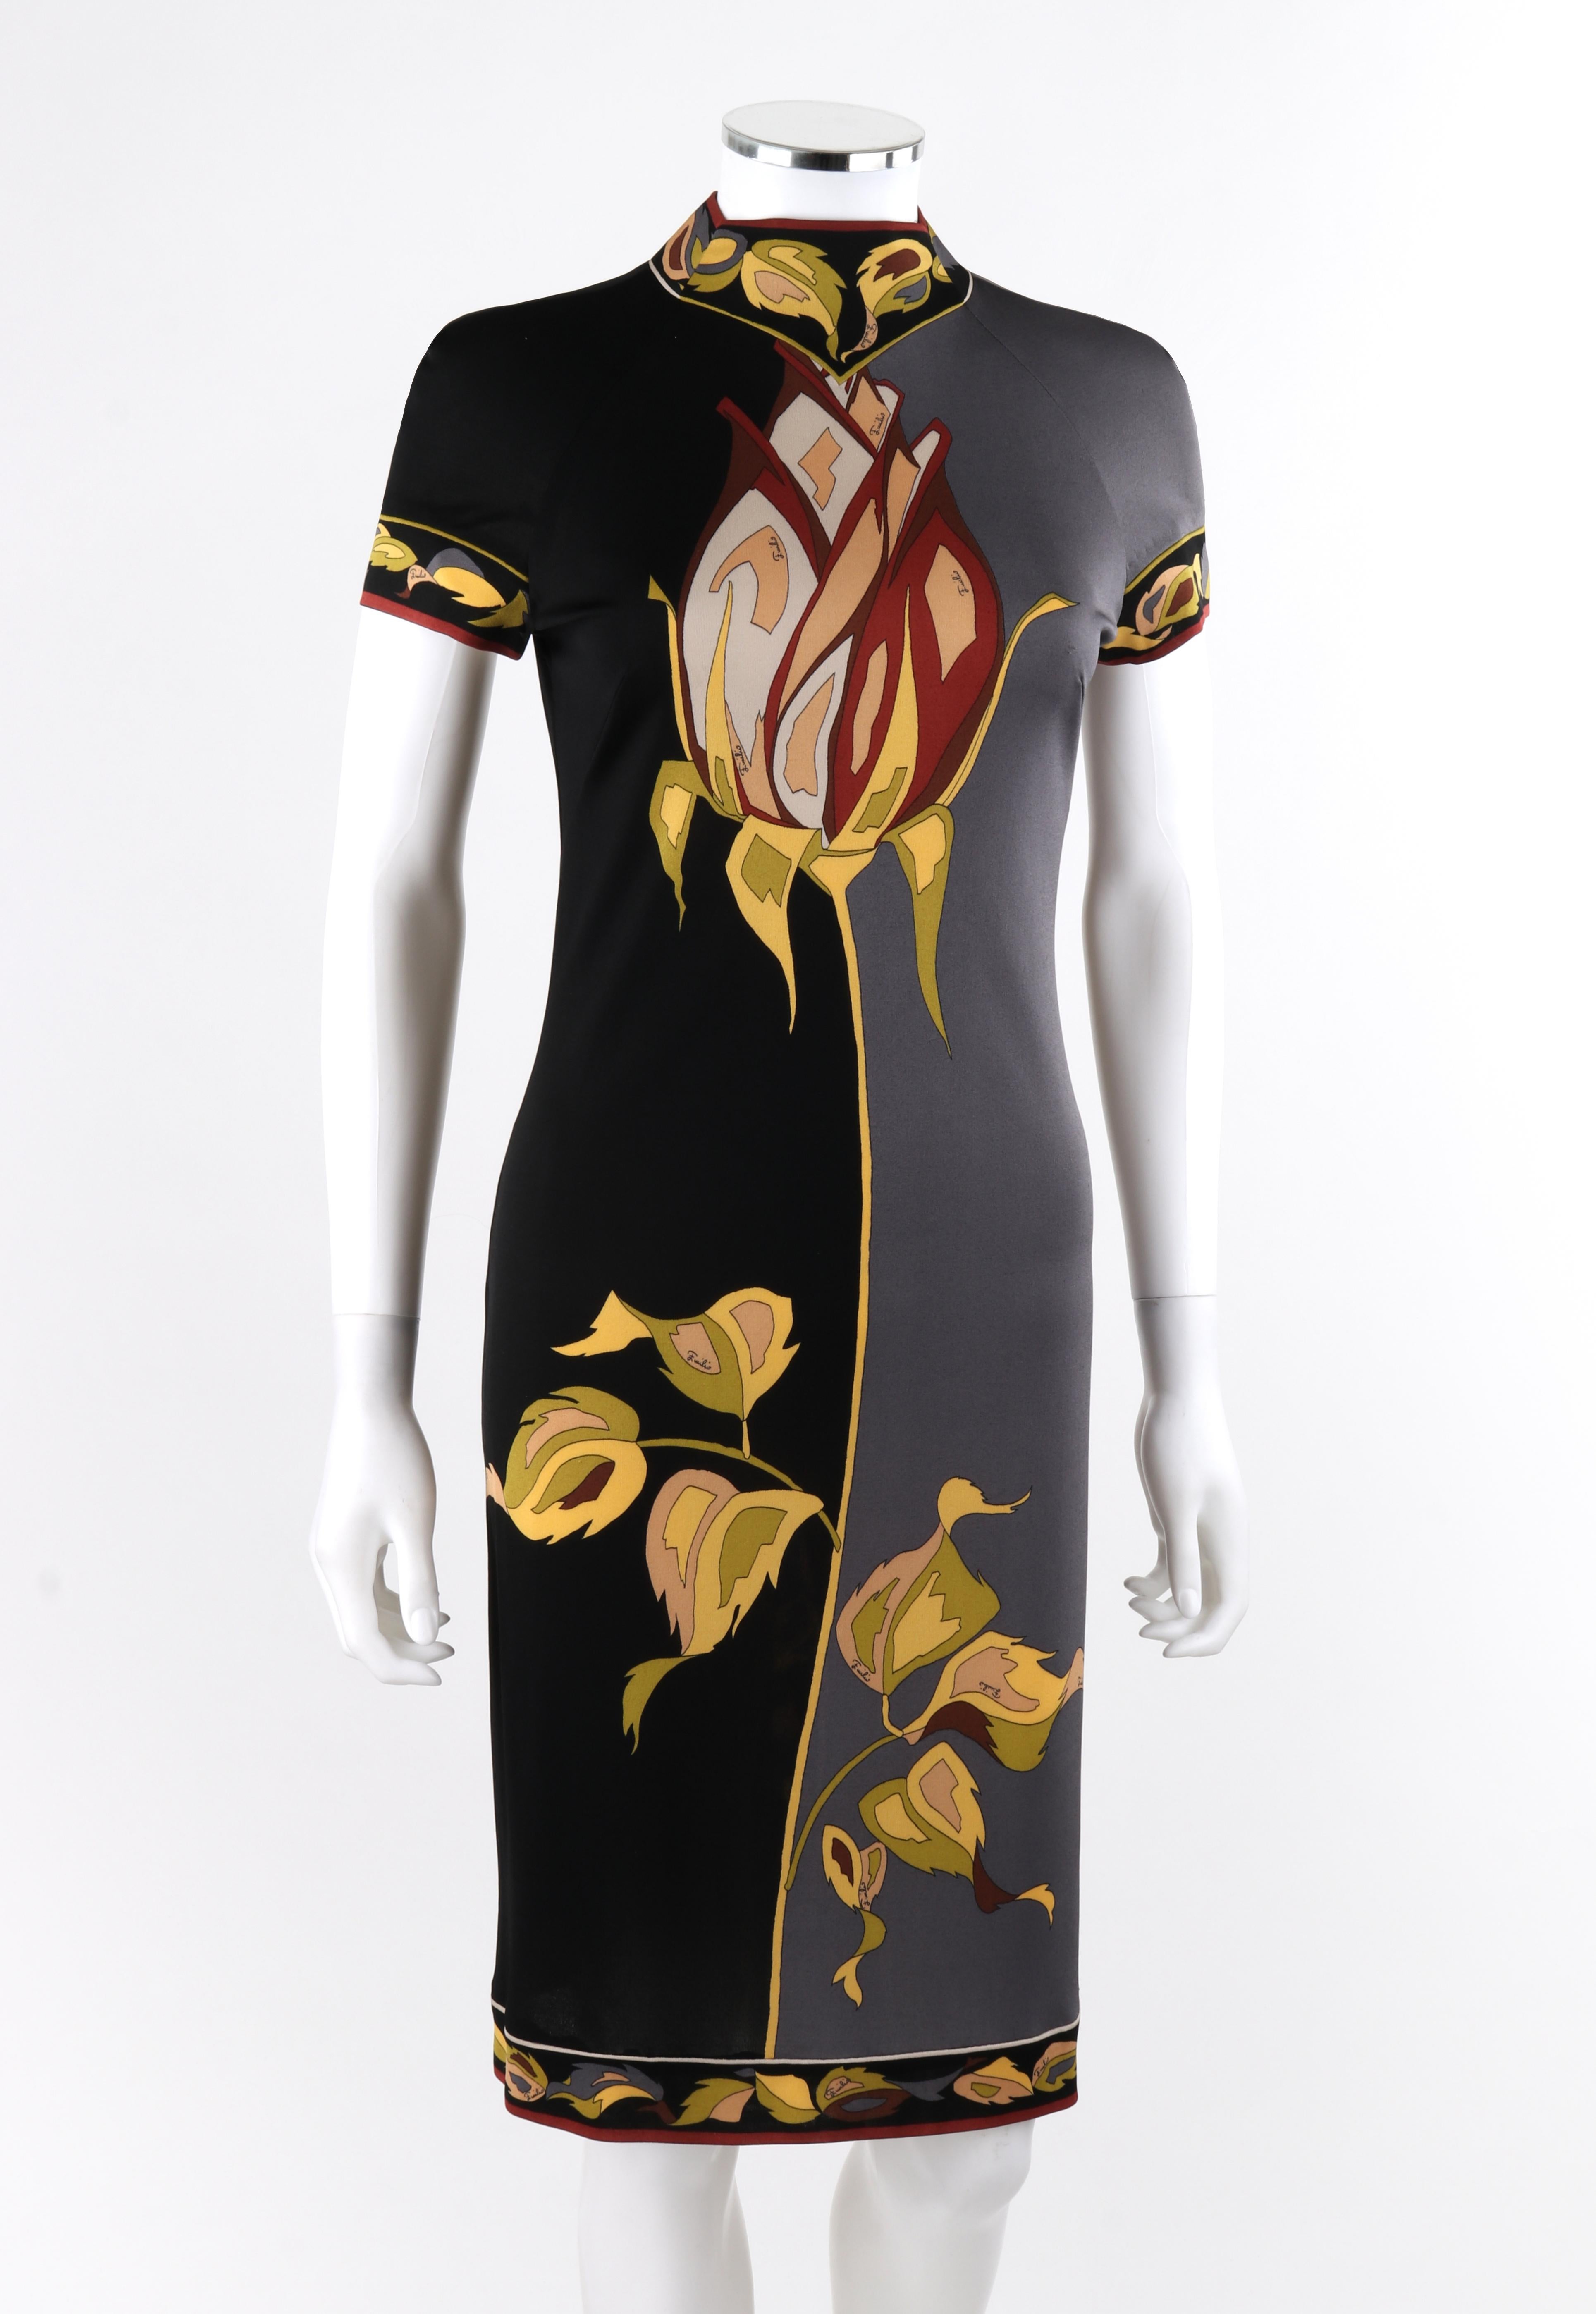 Emilio Pucci c.1970’s Silk Jersey Dual Tone Multi-Color Rose Floral Shift Dress

Circa: 1970’s
Label(s): Emilio Pucci; Exclusively for Sak’s Fifth Ave.
Designer: Emilio Pucci
Style: Shift dress
Color(s): Shades of grey, black, off white, yellow, red